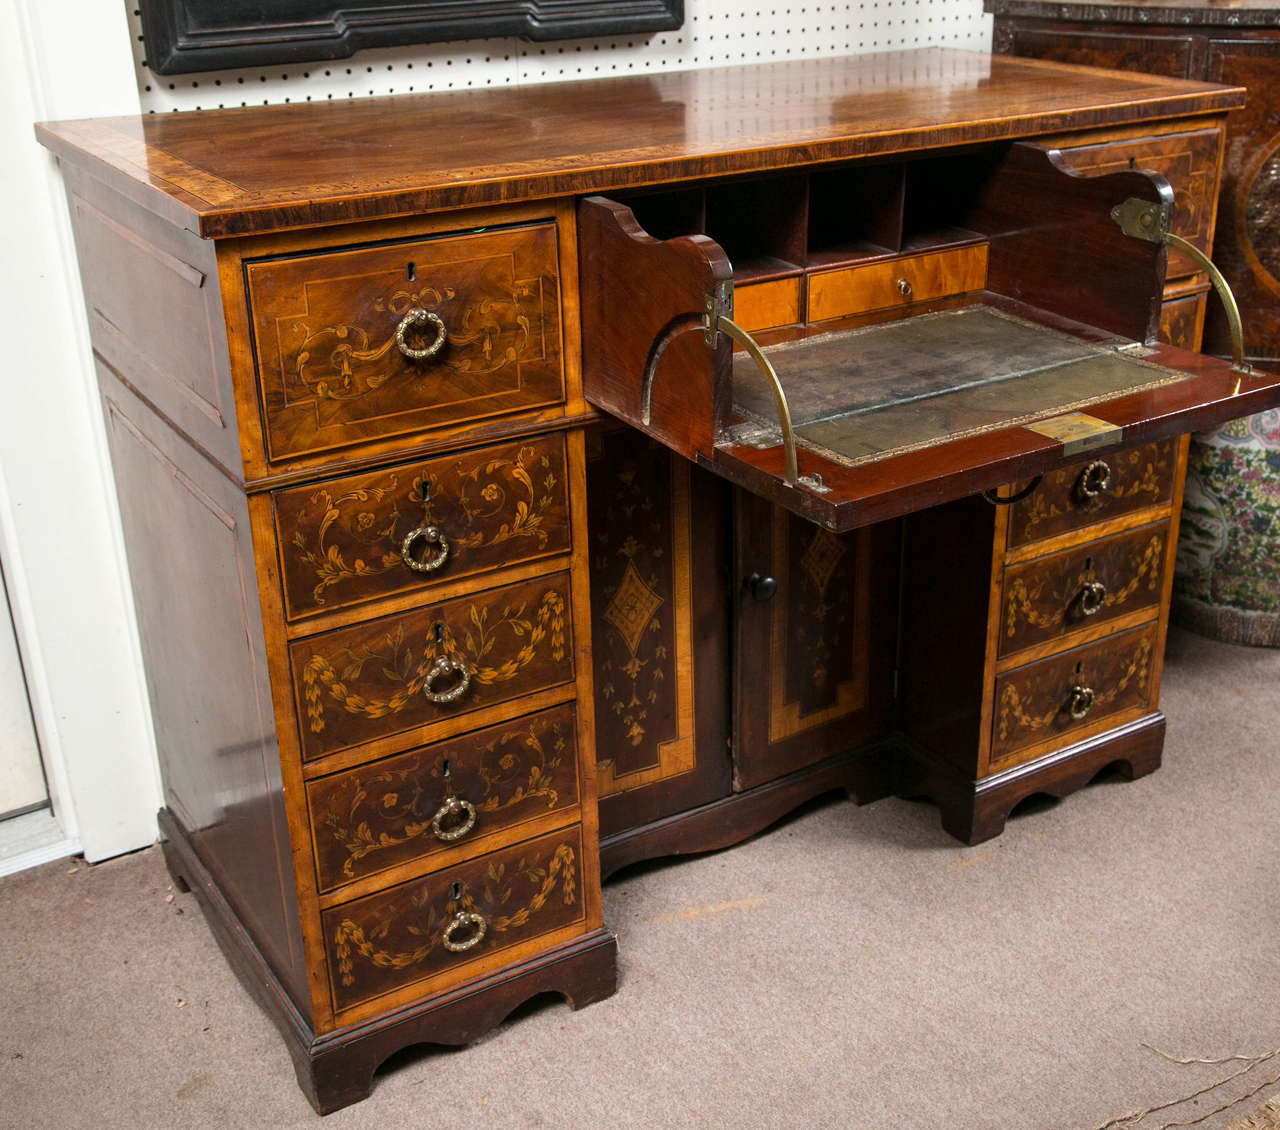 Hand-Crafted Inlaid and Pen Work Knee Hole Desk For Sale